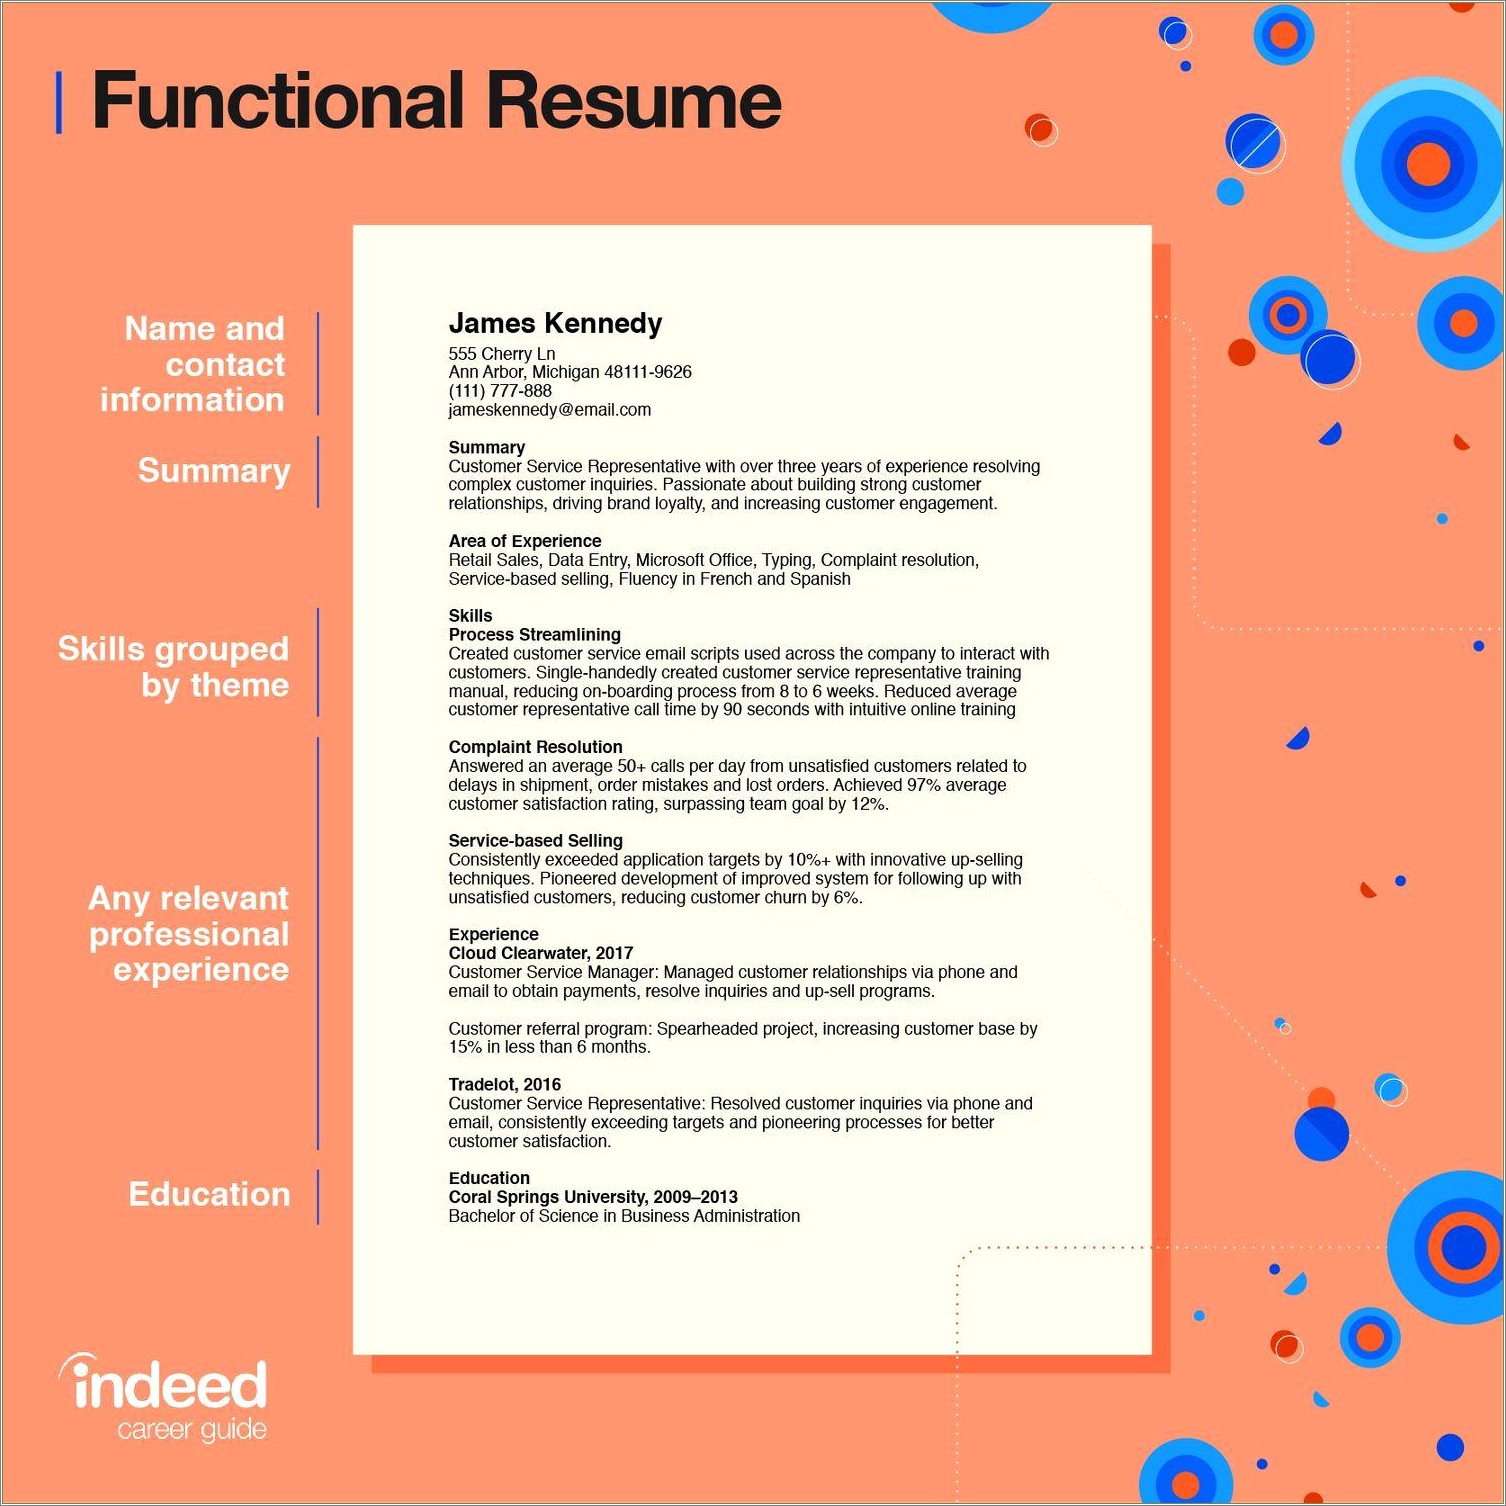 Prioritize Relevant Work Experience On A Resume